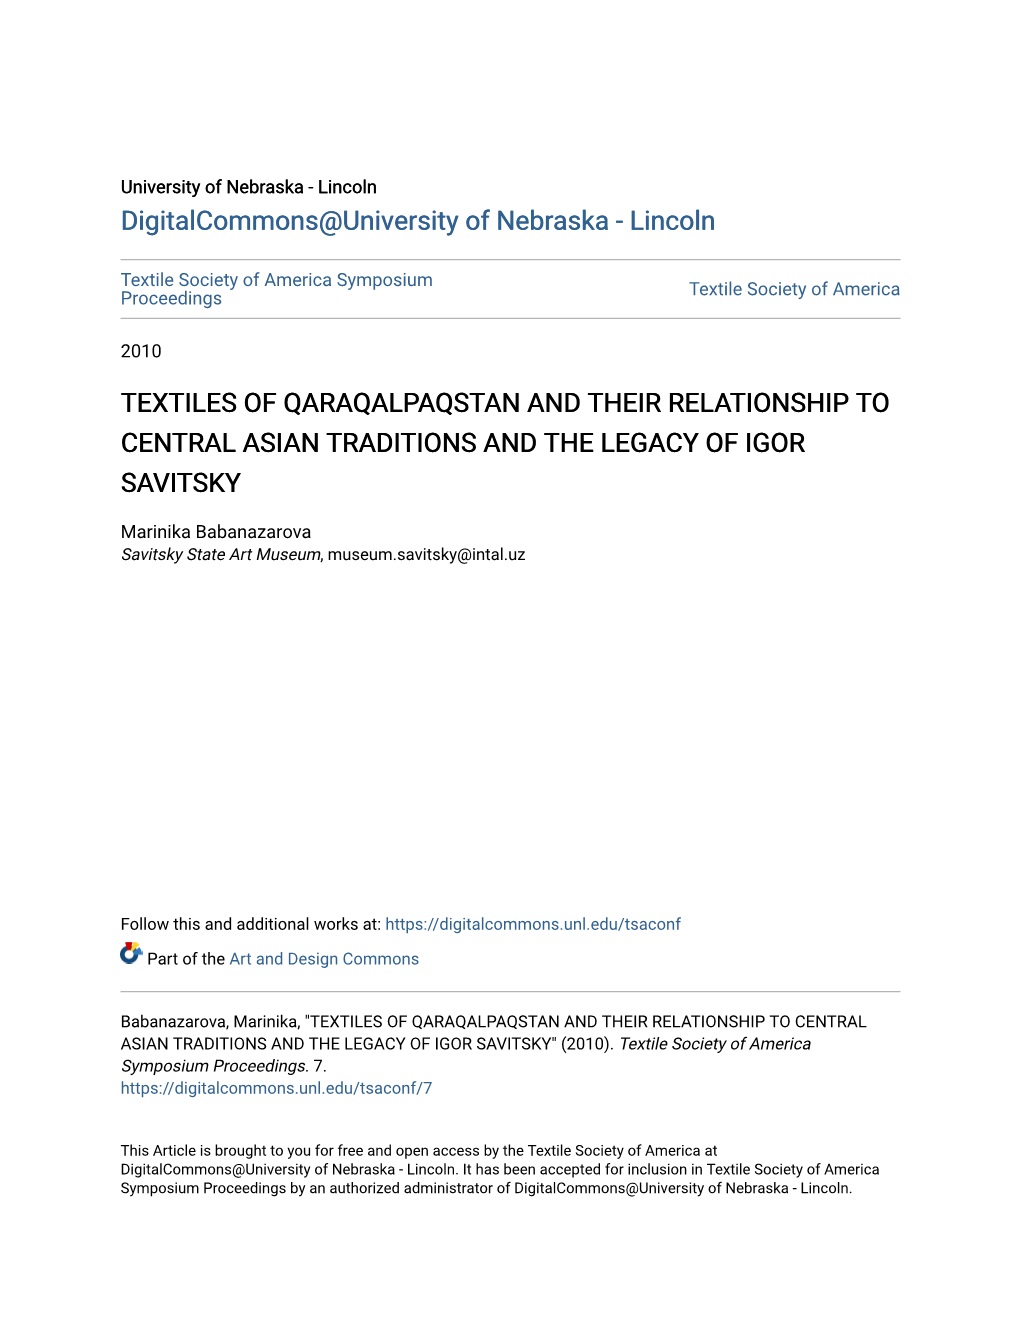 Textiles of Qaraqalpaqstan and Their Relationship to Central Asian Traditions and the Legacy of Igor Savitsky